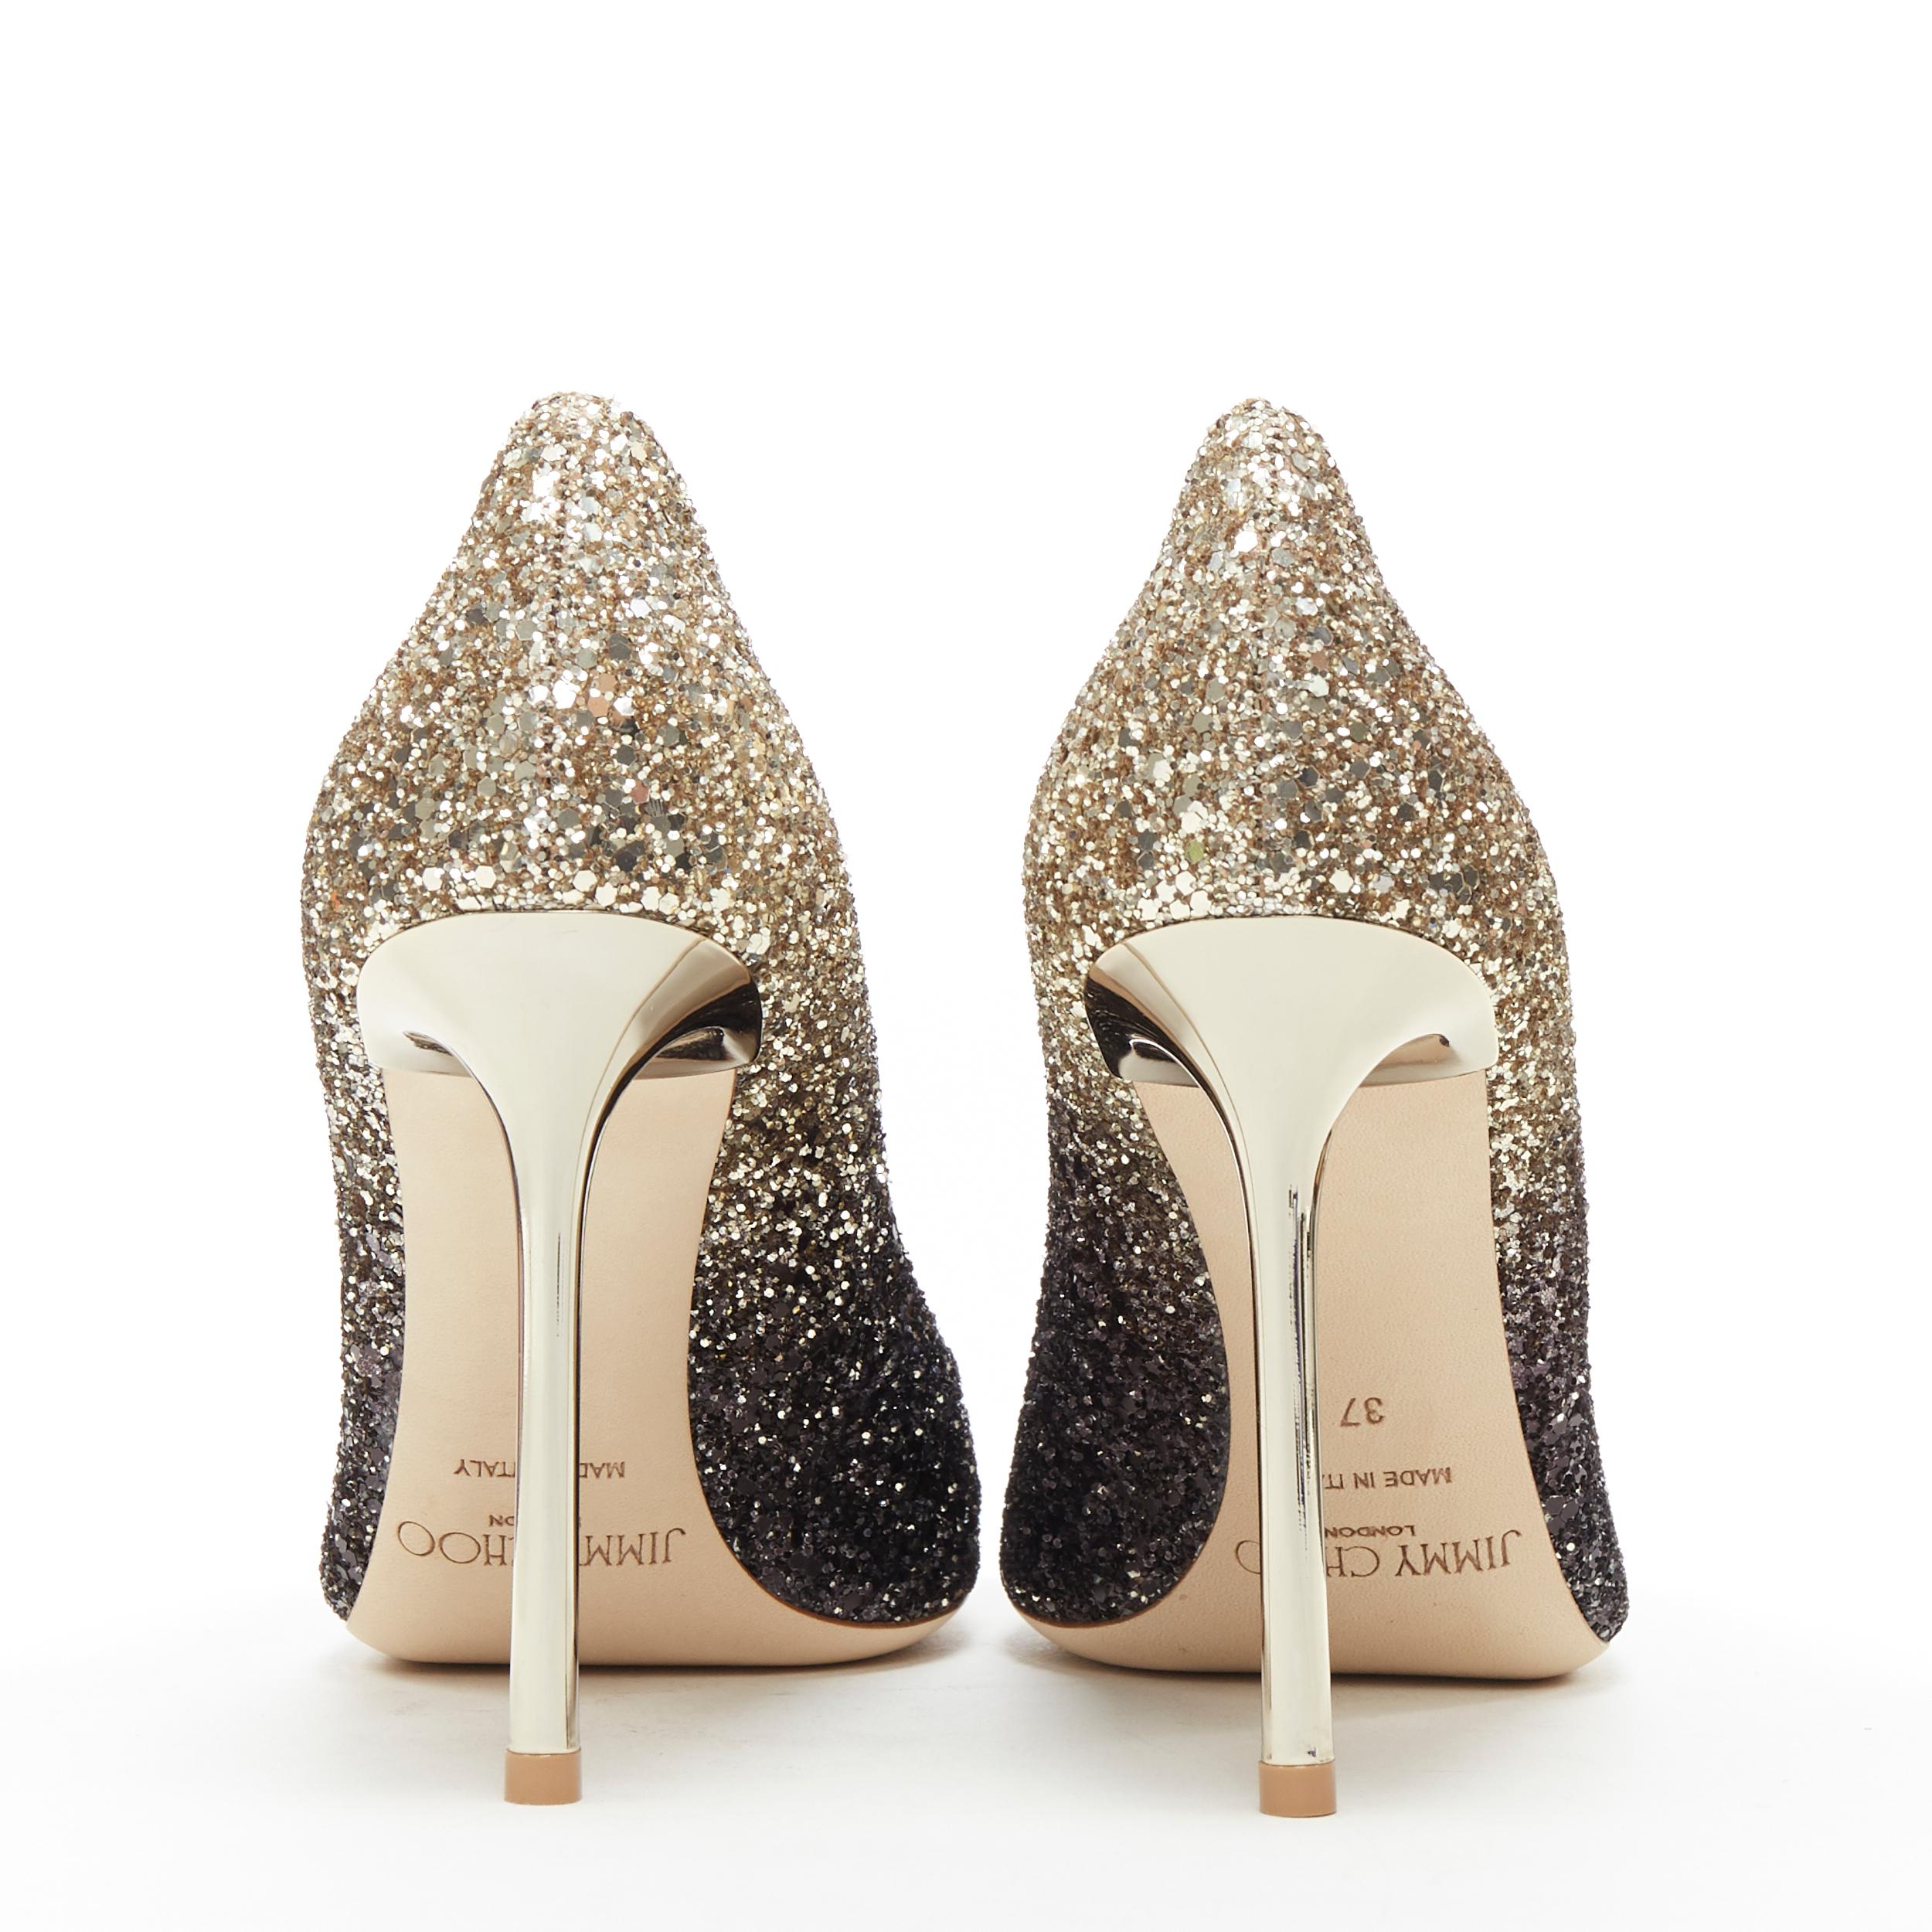 black and gold glitter shoes